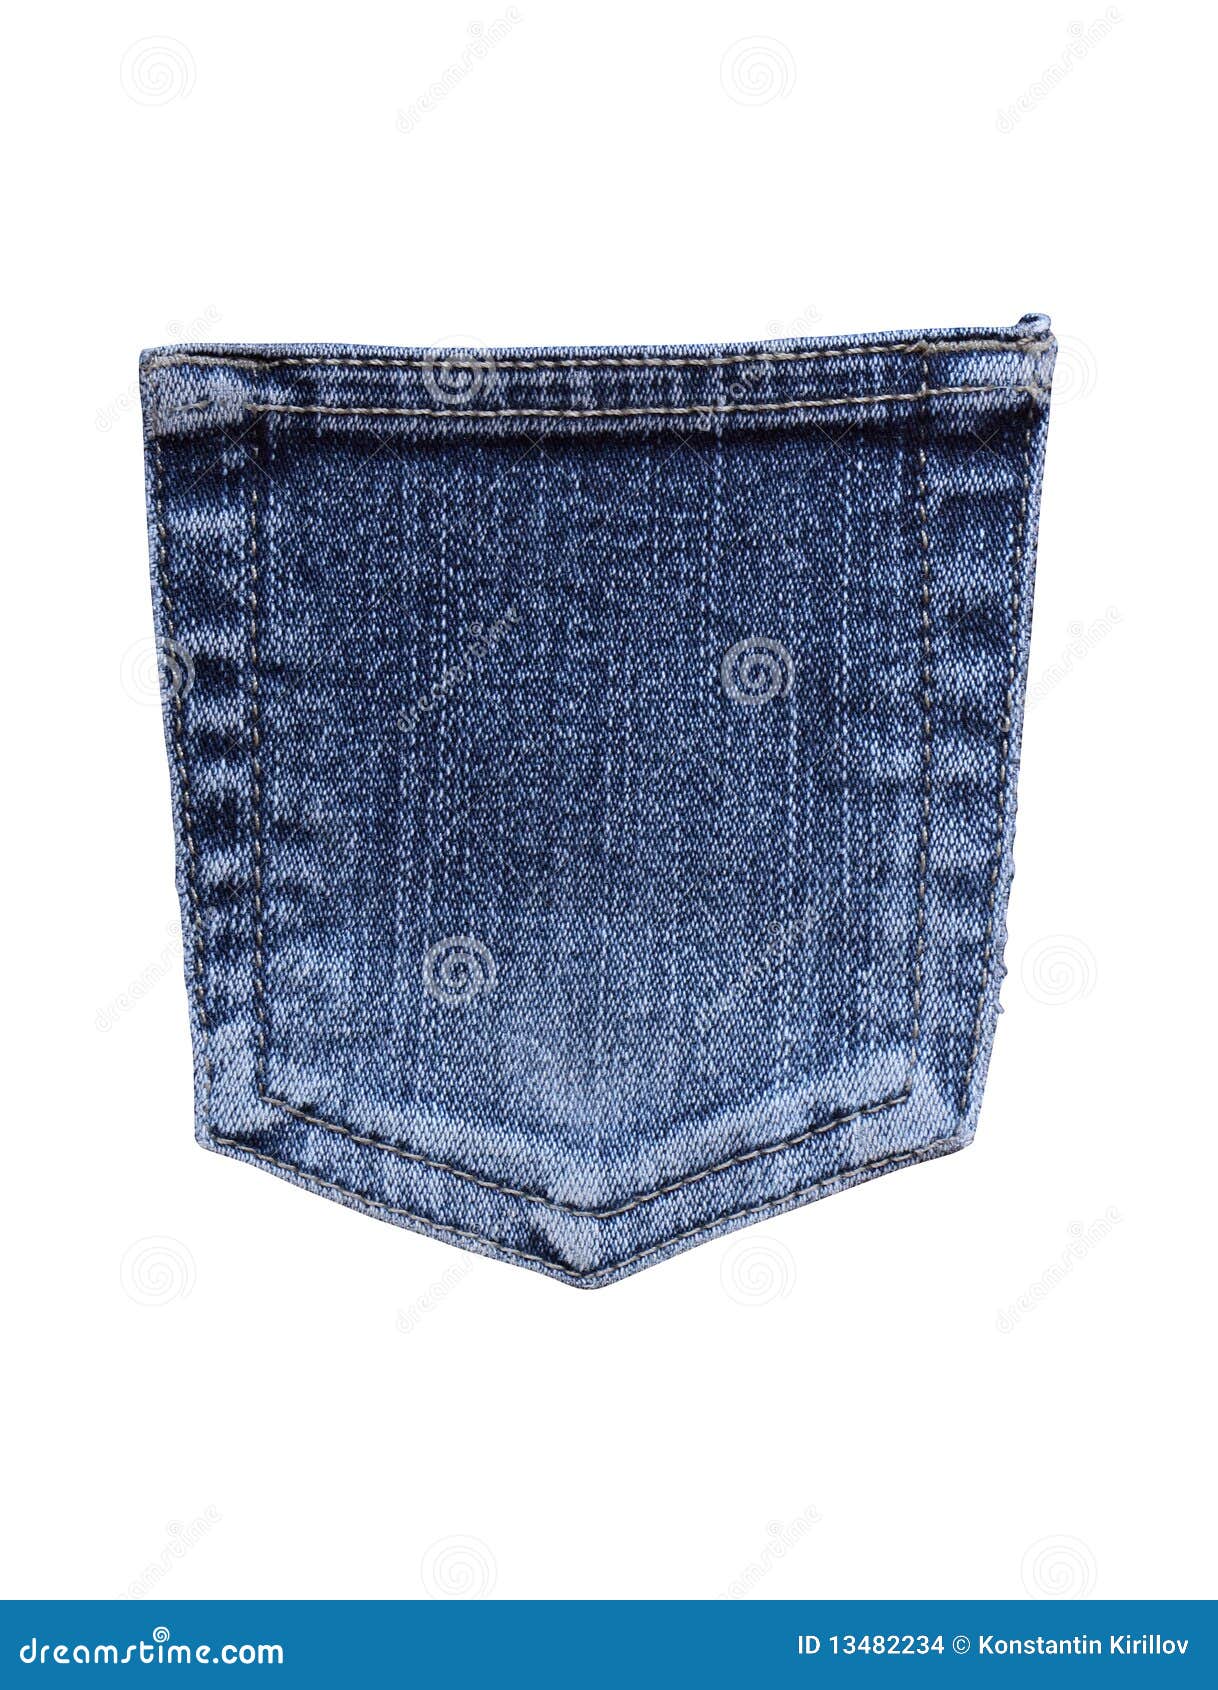 Jeans Pocket stock photo. Image of effect, textile, jeans - 13482234